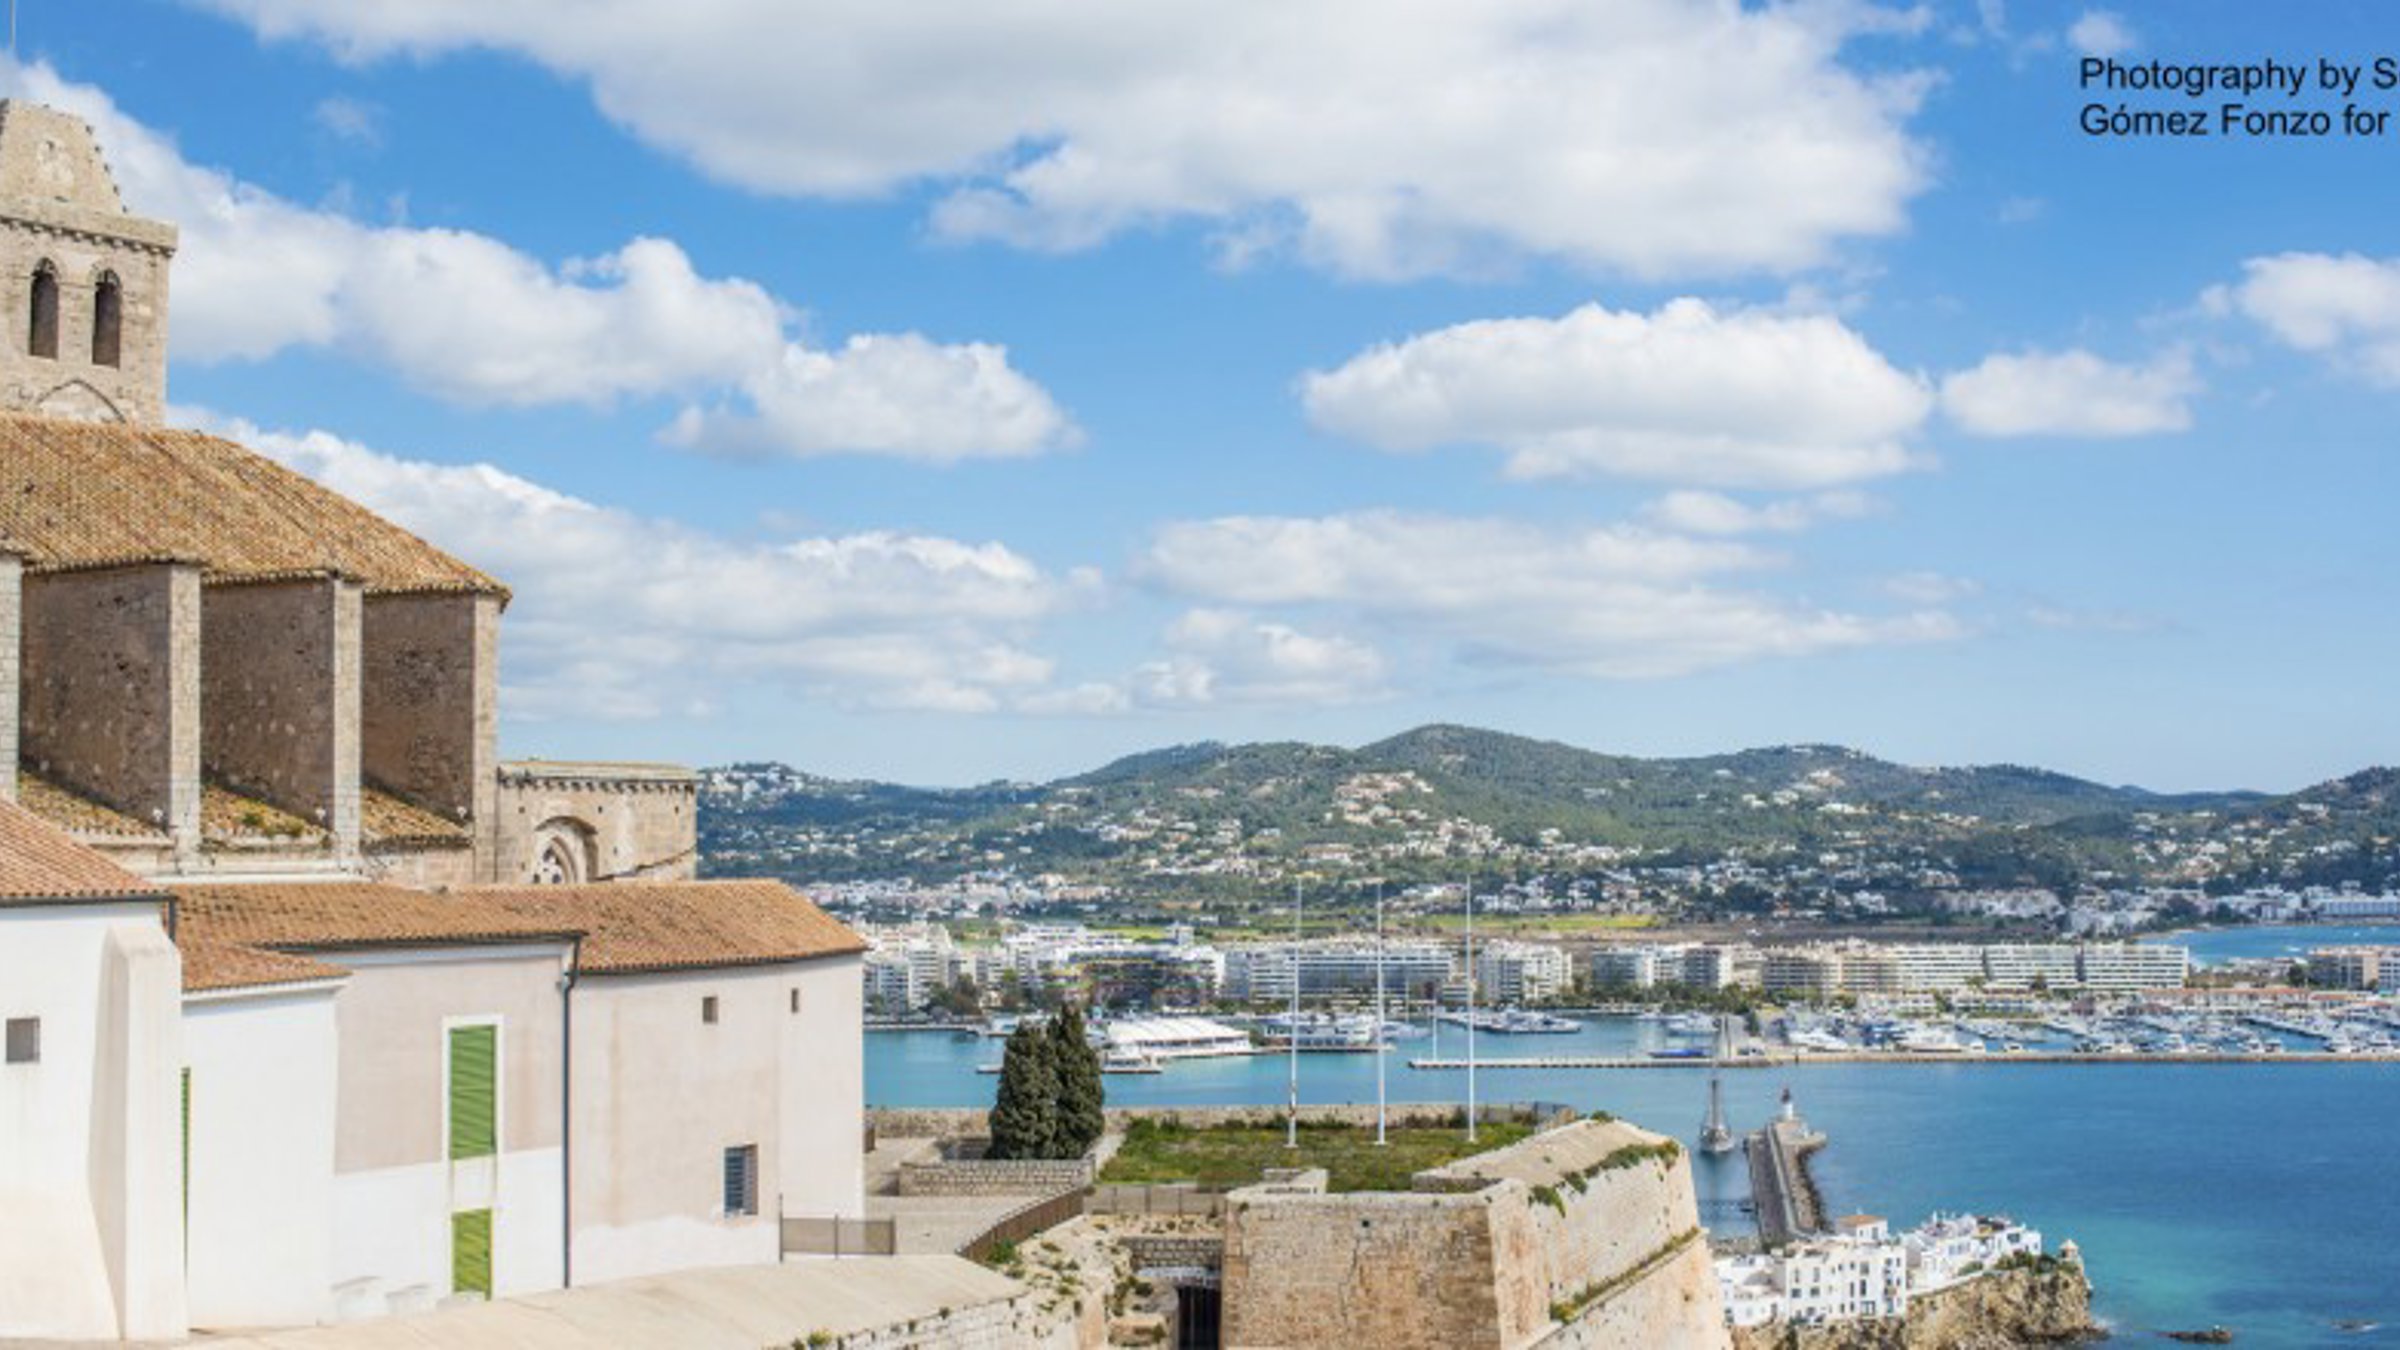 Insiders Guide to... Secrets of Ibiza Town